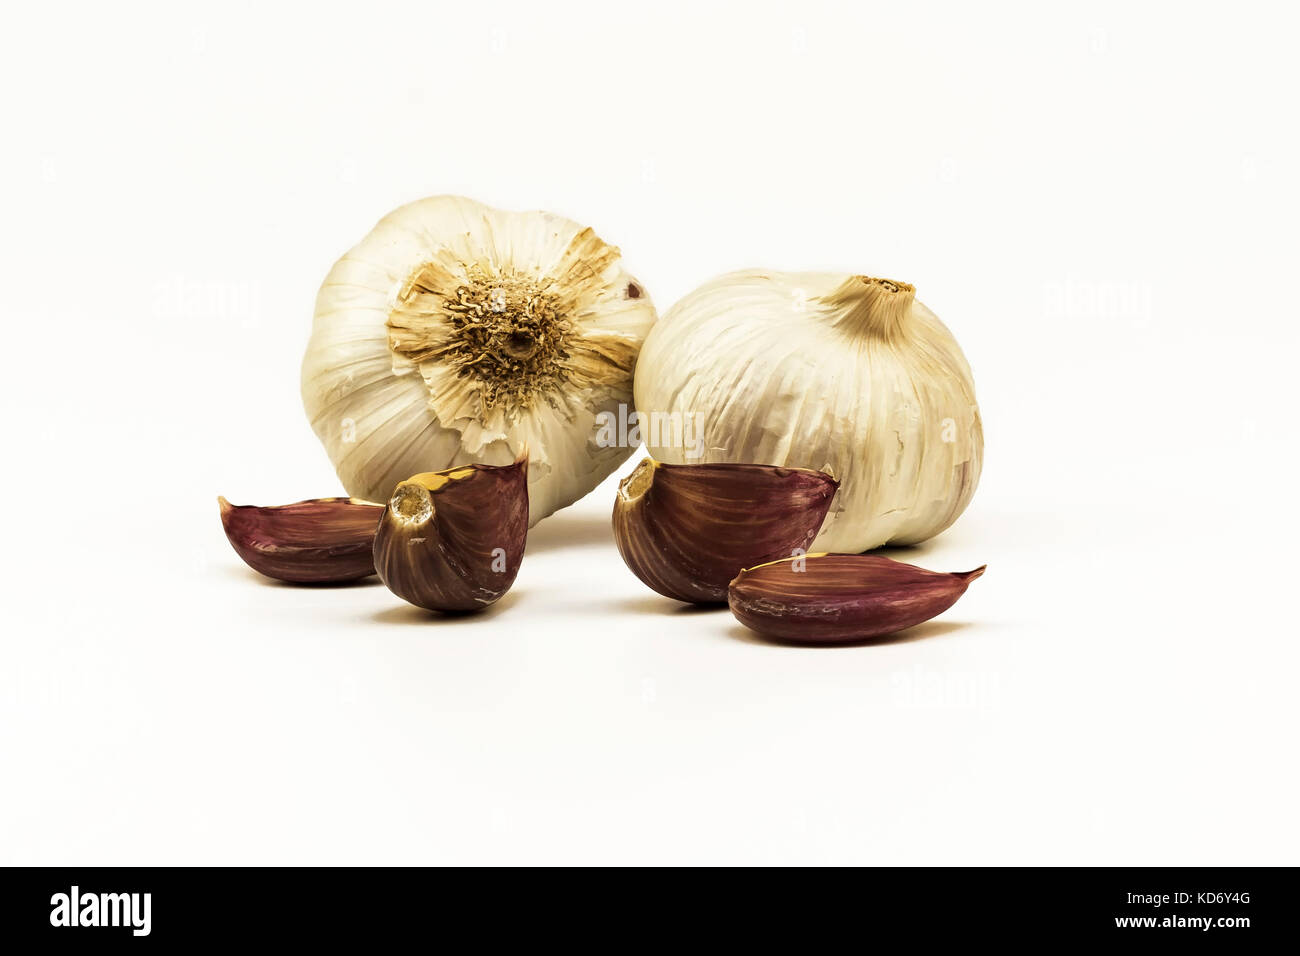 On a white background lie heads and raw garlic cloves Stock Photo